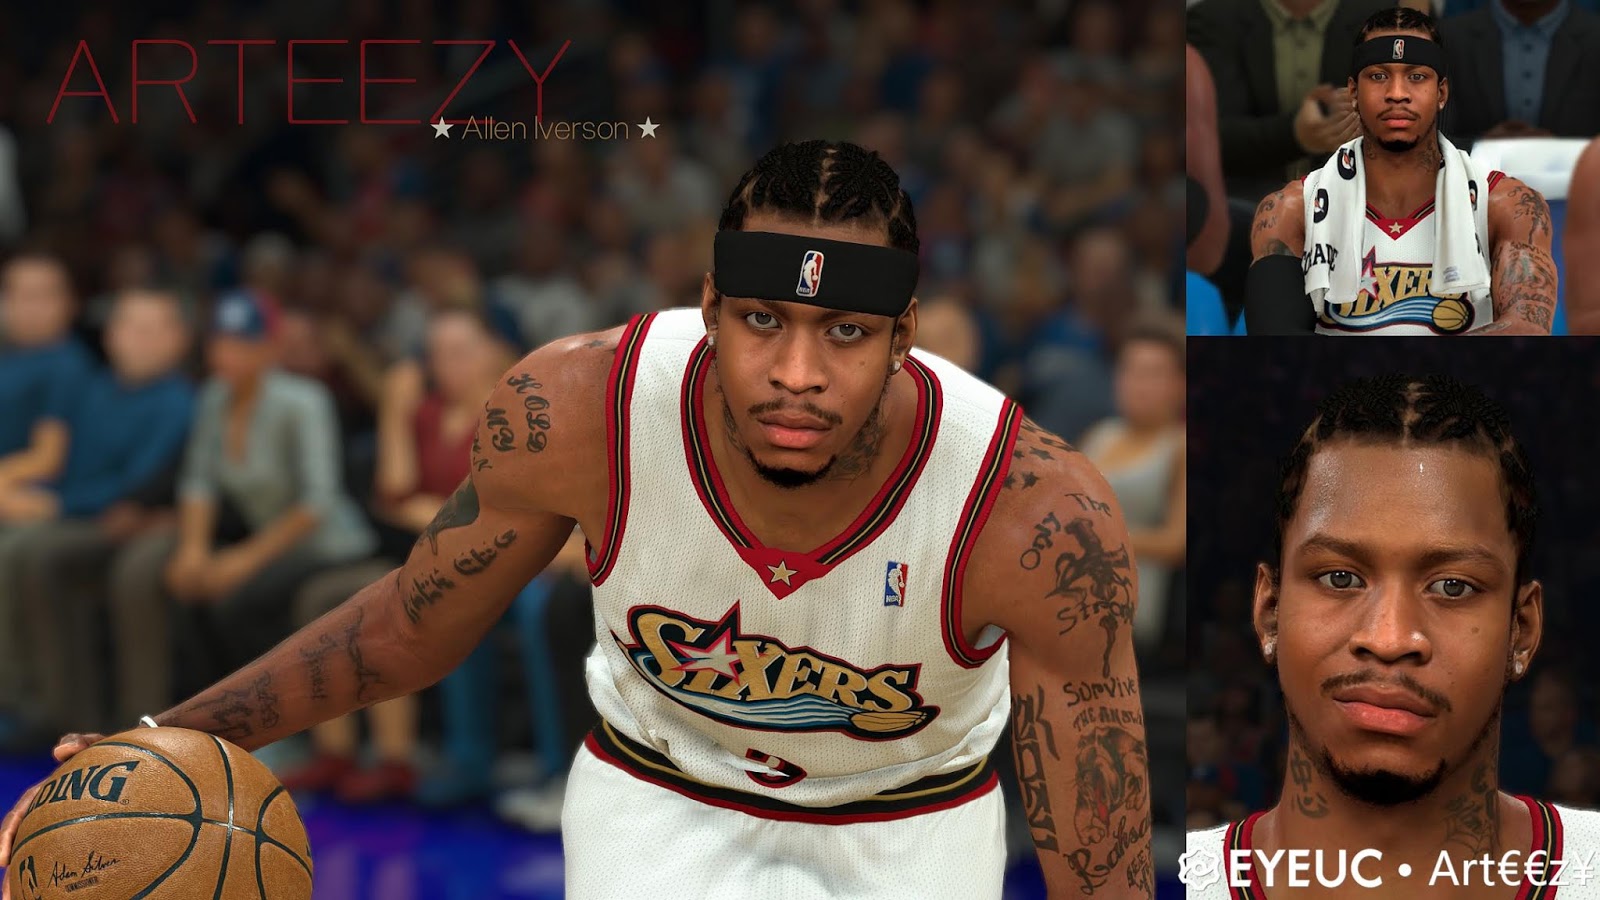 Download Allen Iverson Hd Face And Body Model By Arteezy For 2k20 Nba 2k Updates Roster Update Cyberface Etc PSD Mockup Templates